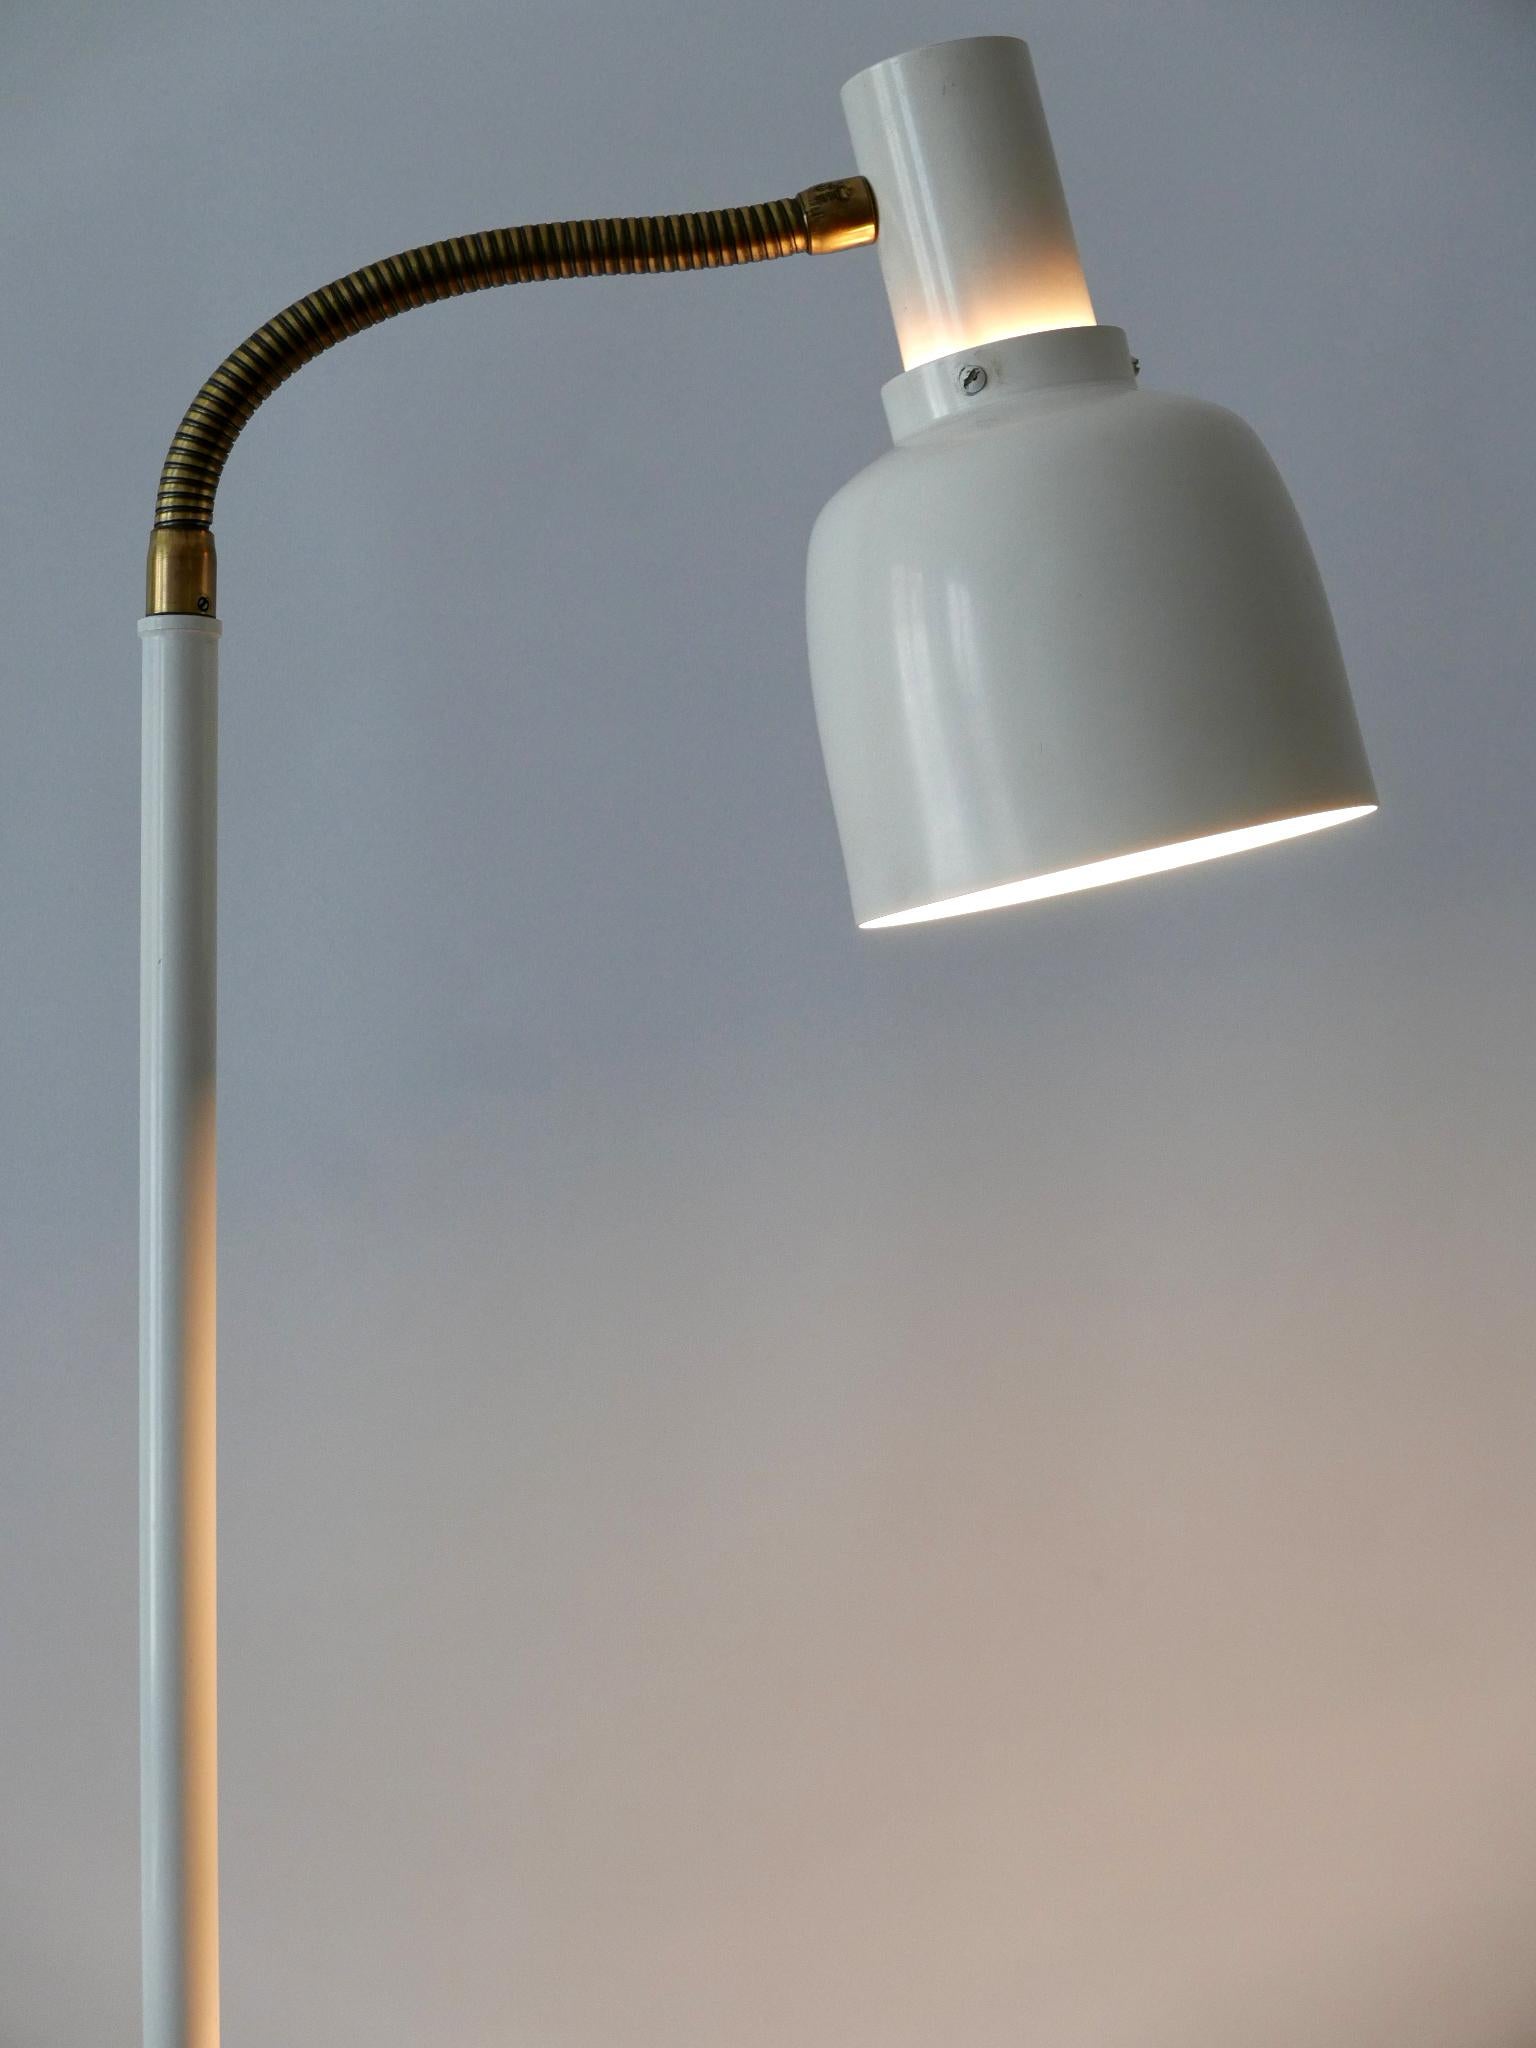 Rare Mid-Century Modern Floor Lamp or Reading Light by Hans-Agne Jakobsson 1960s In Good Condition For Sale In Munich, DE